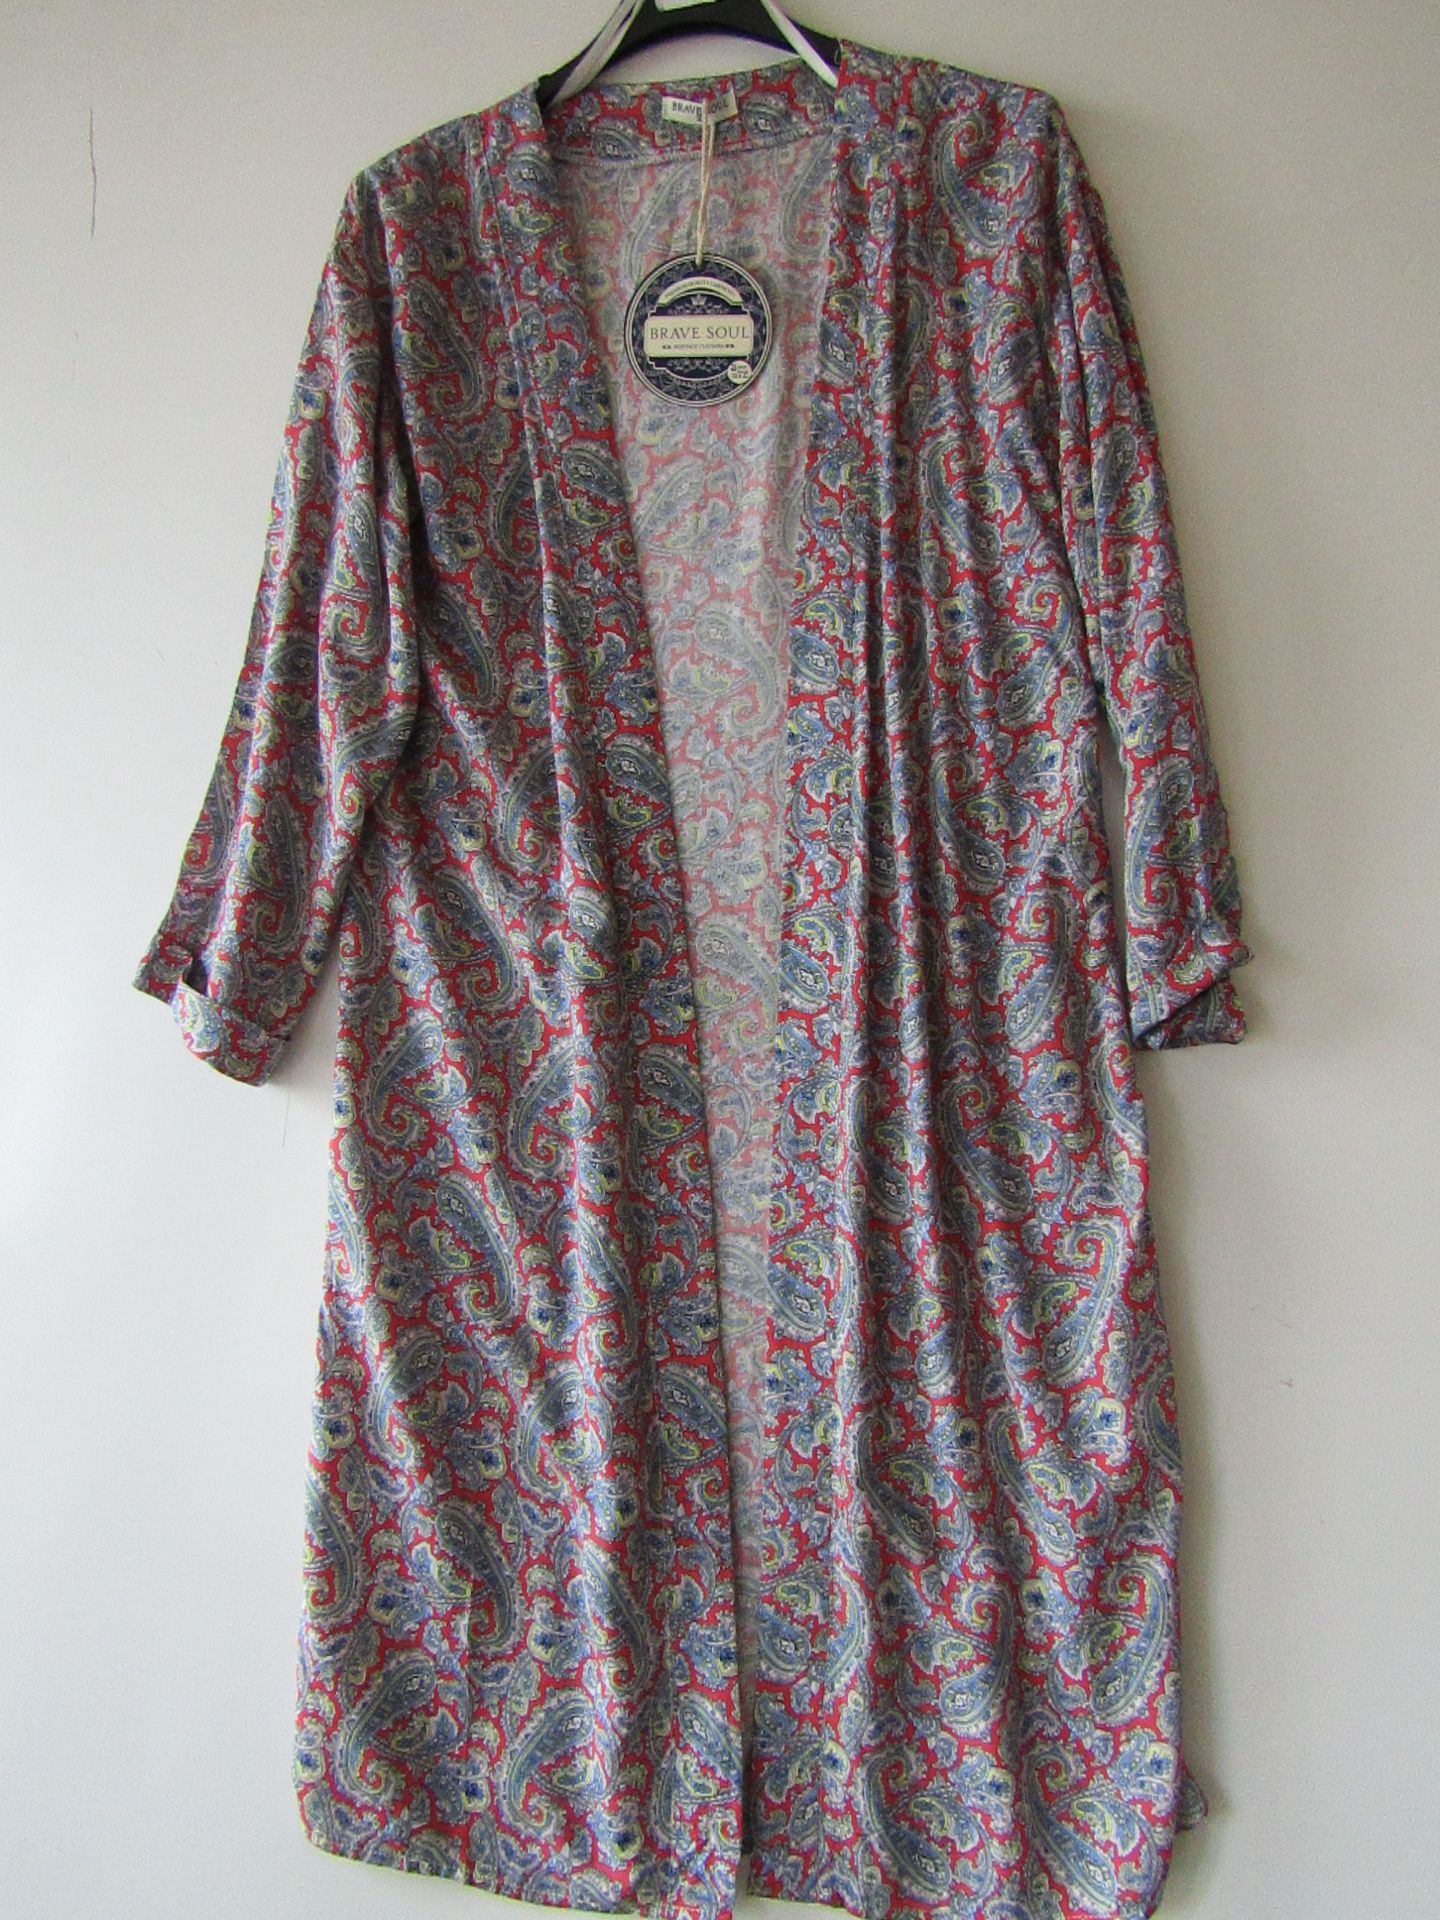 Ladies Brave Soul Cover Up. New Sample with Tags. Size XS